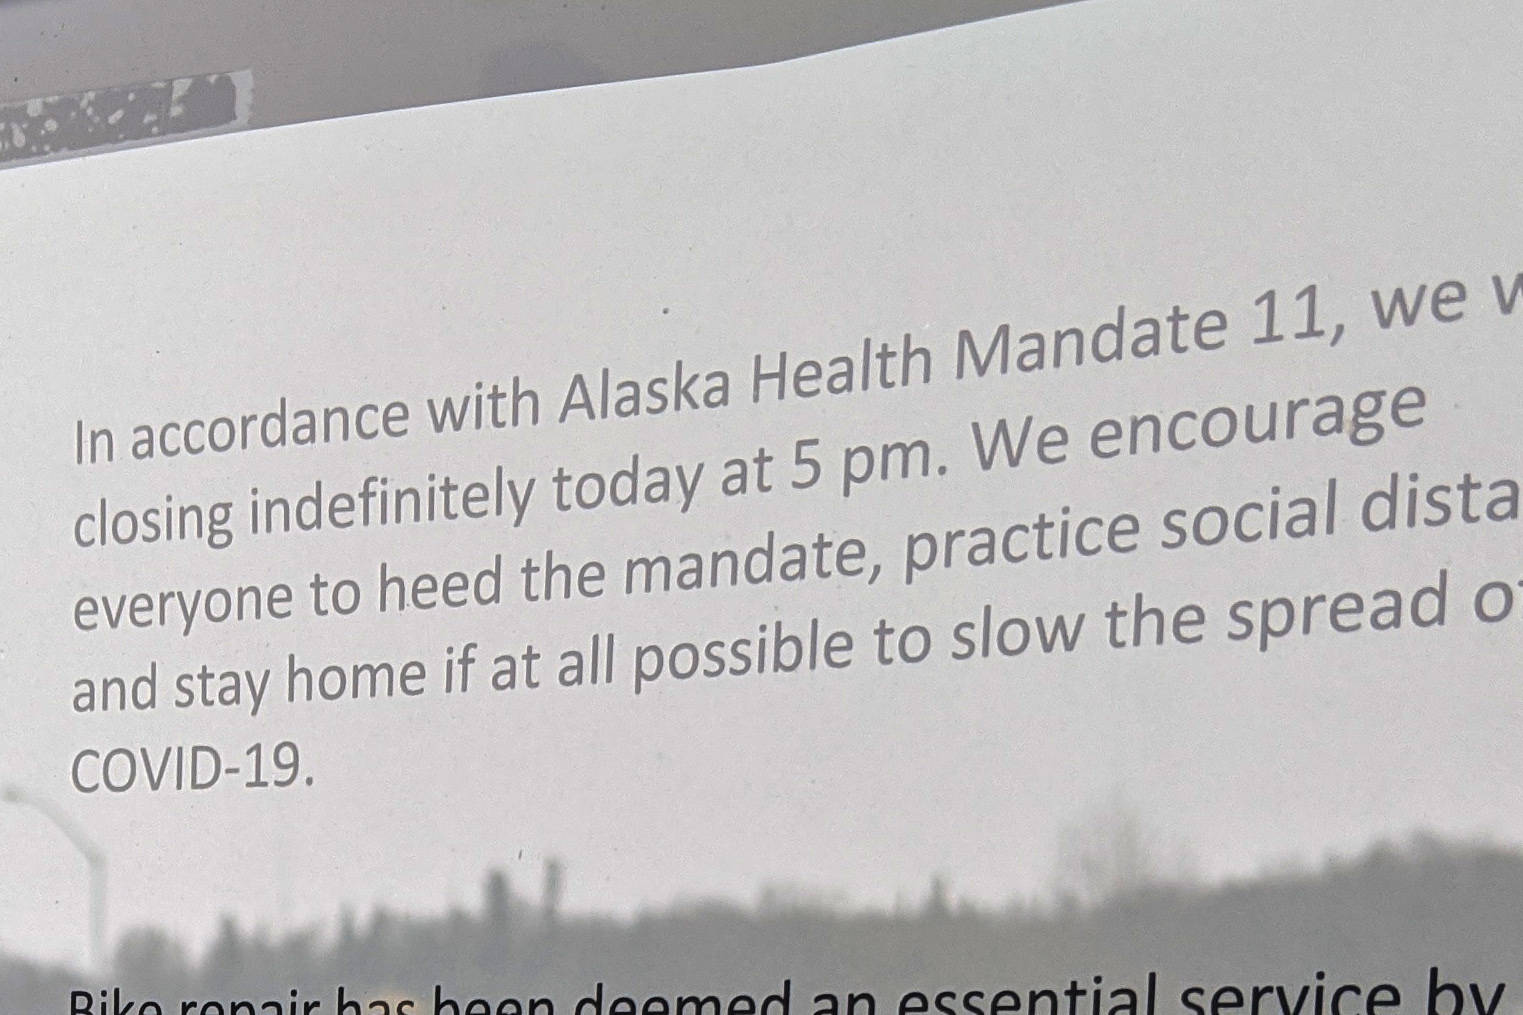 A sign notifying the public of closure of nonessential businesses due to public health mandate 11 can be seen in Soldotna, Alaska, on April 1, 2020. Gov. Mike Dunleavy issued guidelines allowing nonessential businesses to operate in a limited capacity on Wednesday, April 22, 2020. (Photo by Erin Thompson/Peninsula Clarion)